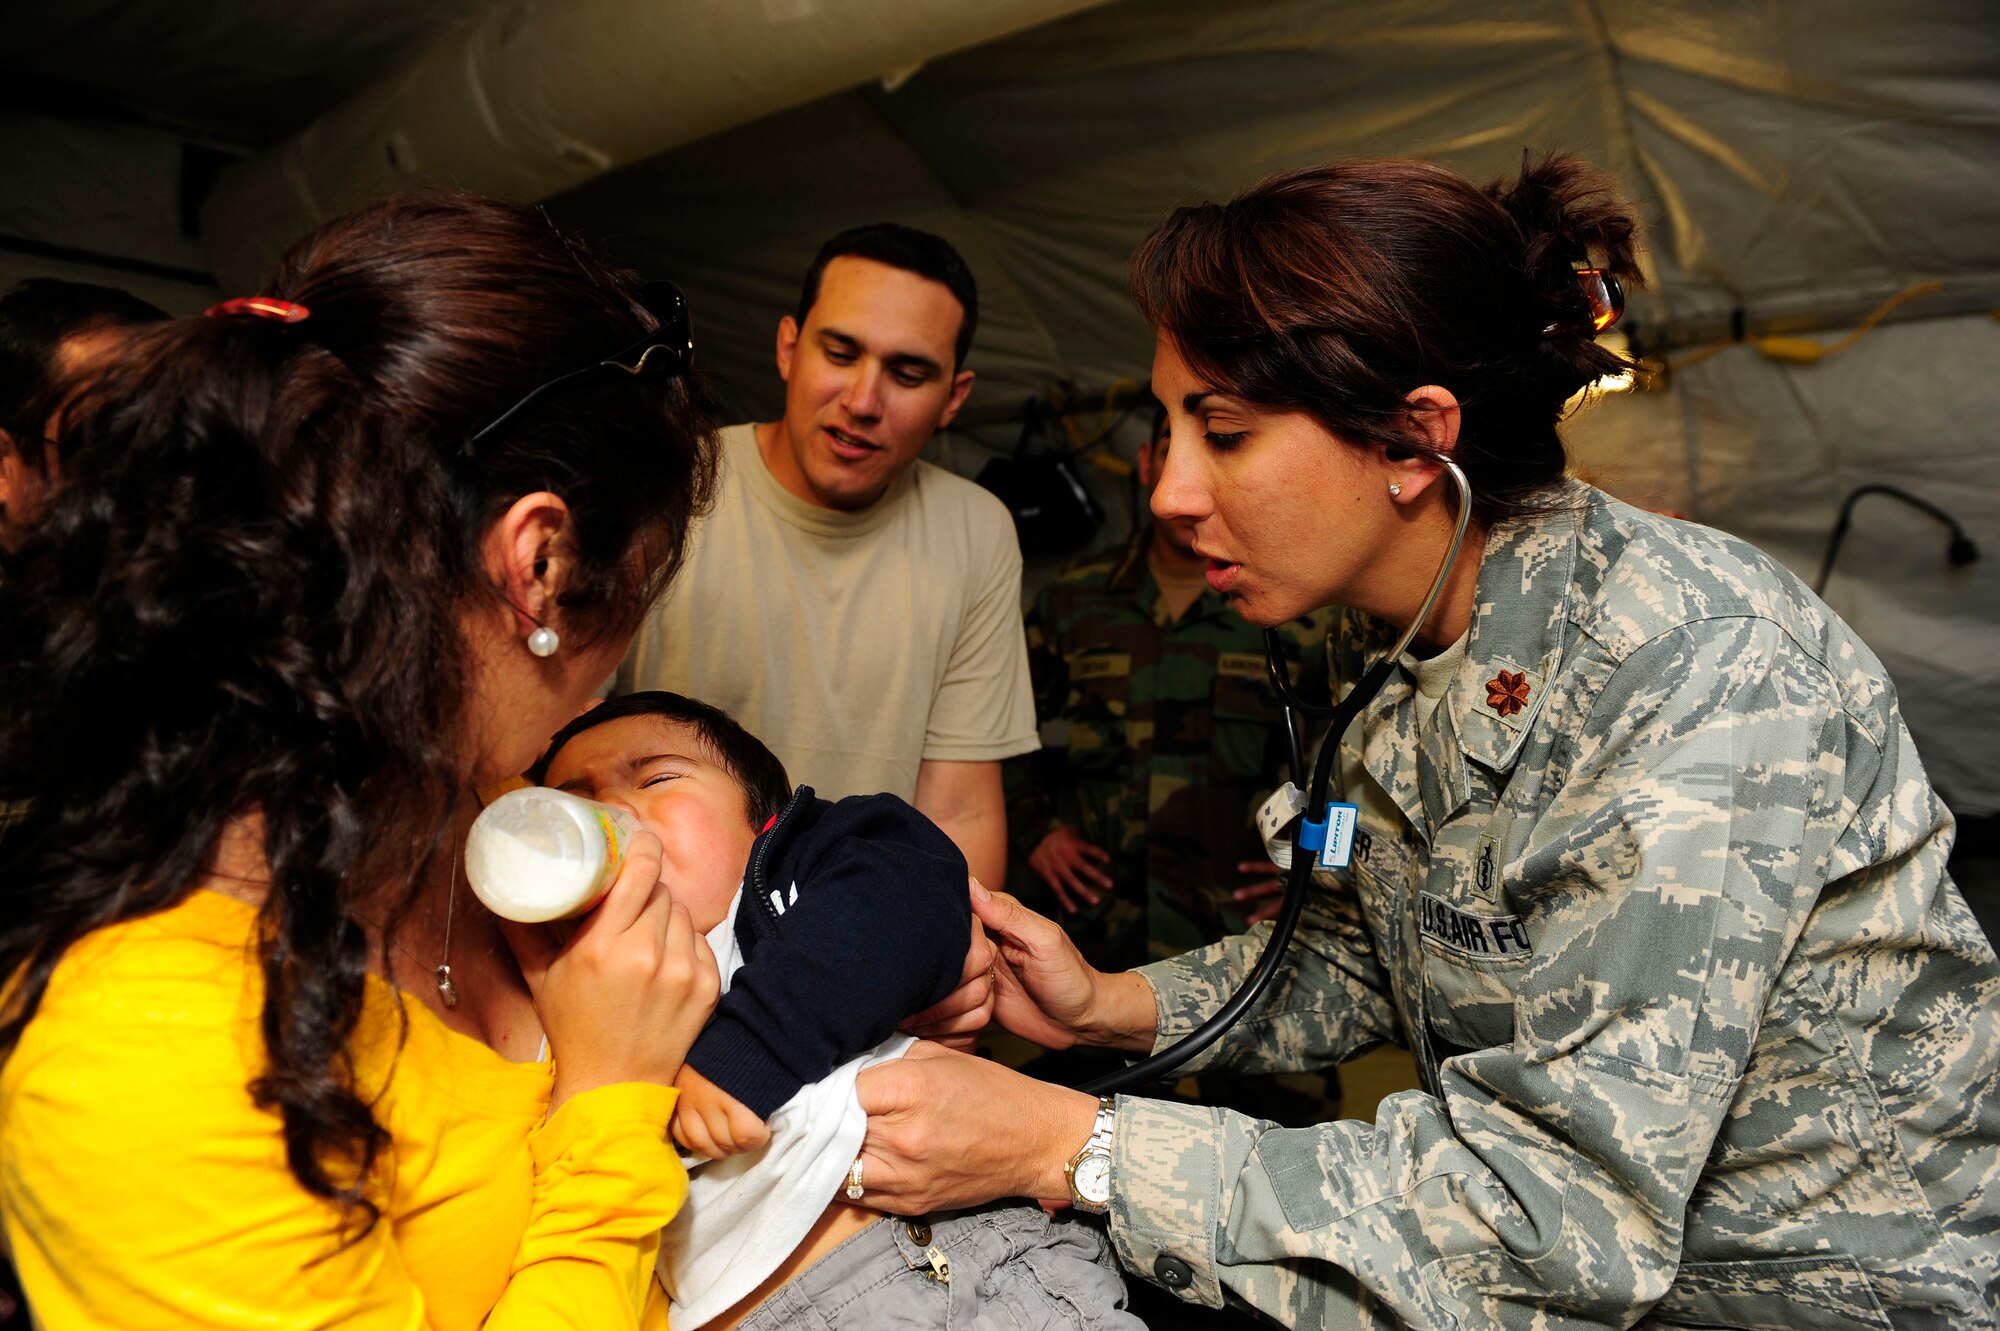 Major Deena Sutter, 59th Medical Wing at Lackland Air Force Base, Texas, checks the heartbeat of an ill child March 14, 2010, in Angol, Chile. Airmen from an Air Force Expeditionary Medical Support team along with members of the Chilean army built a mobile hospital here to help augment medical services for nearly 110,000 Chileans in the region. 